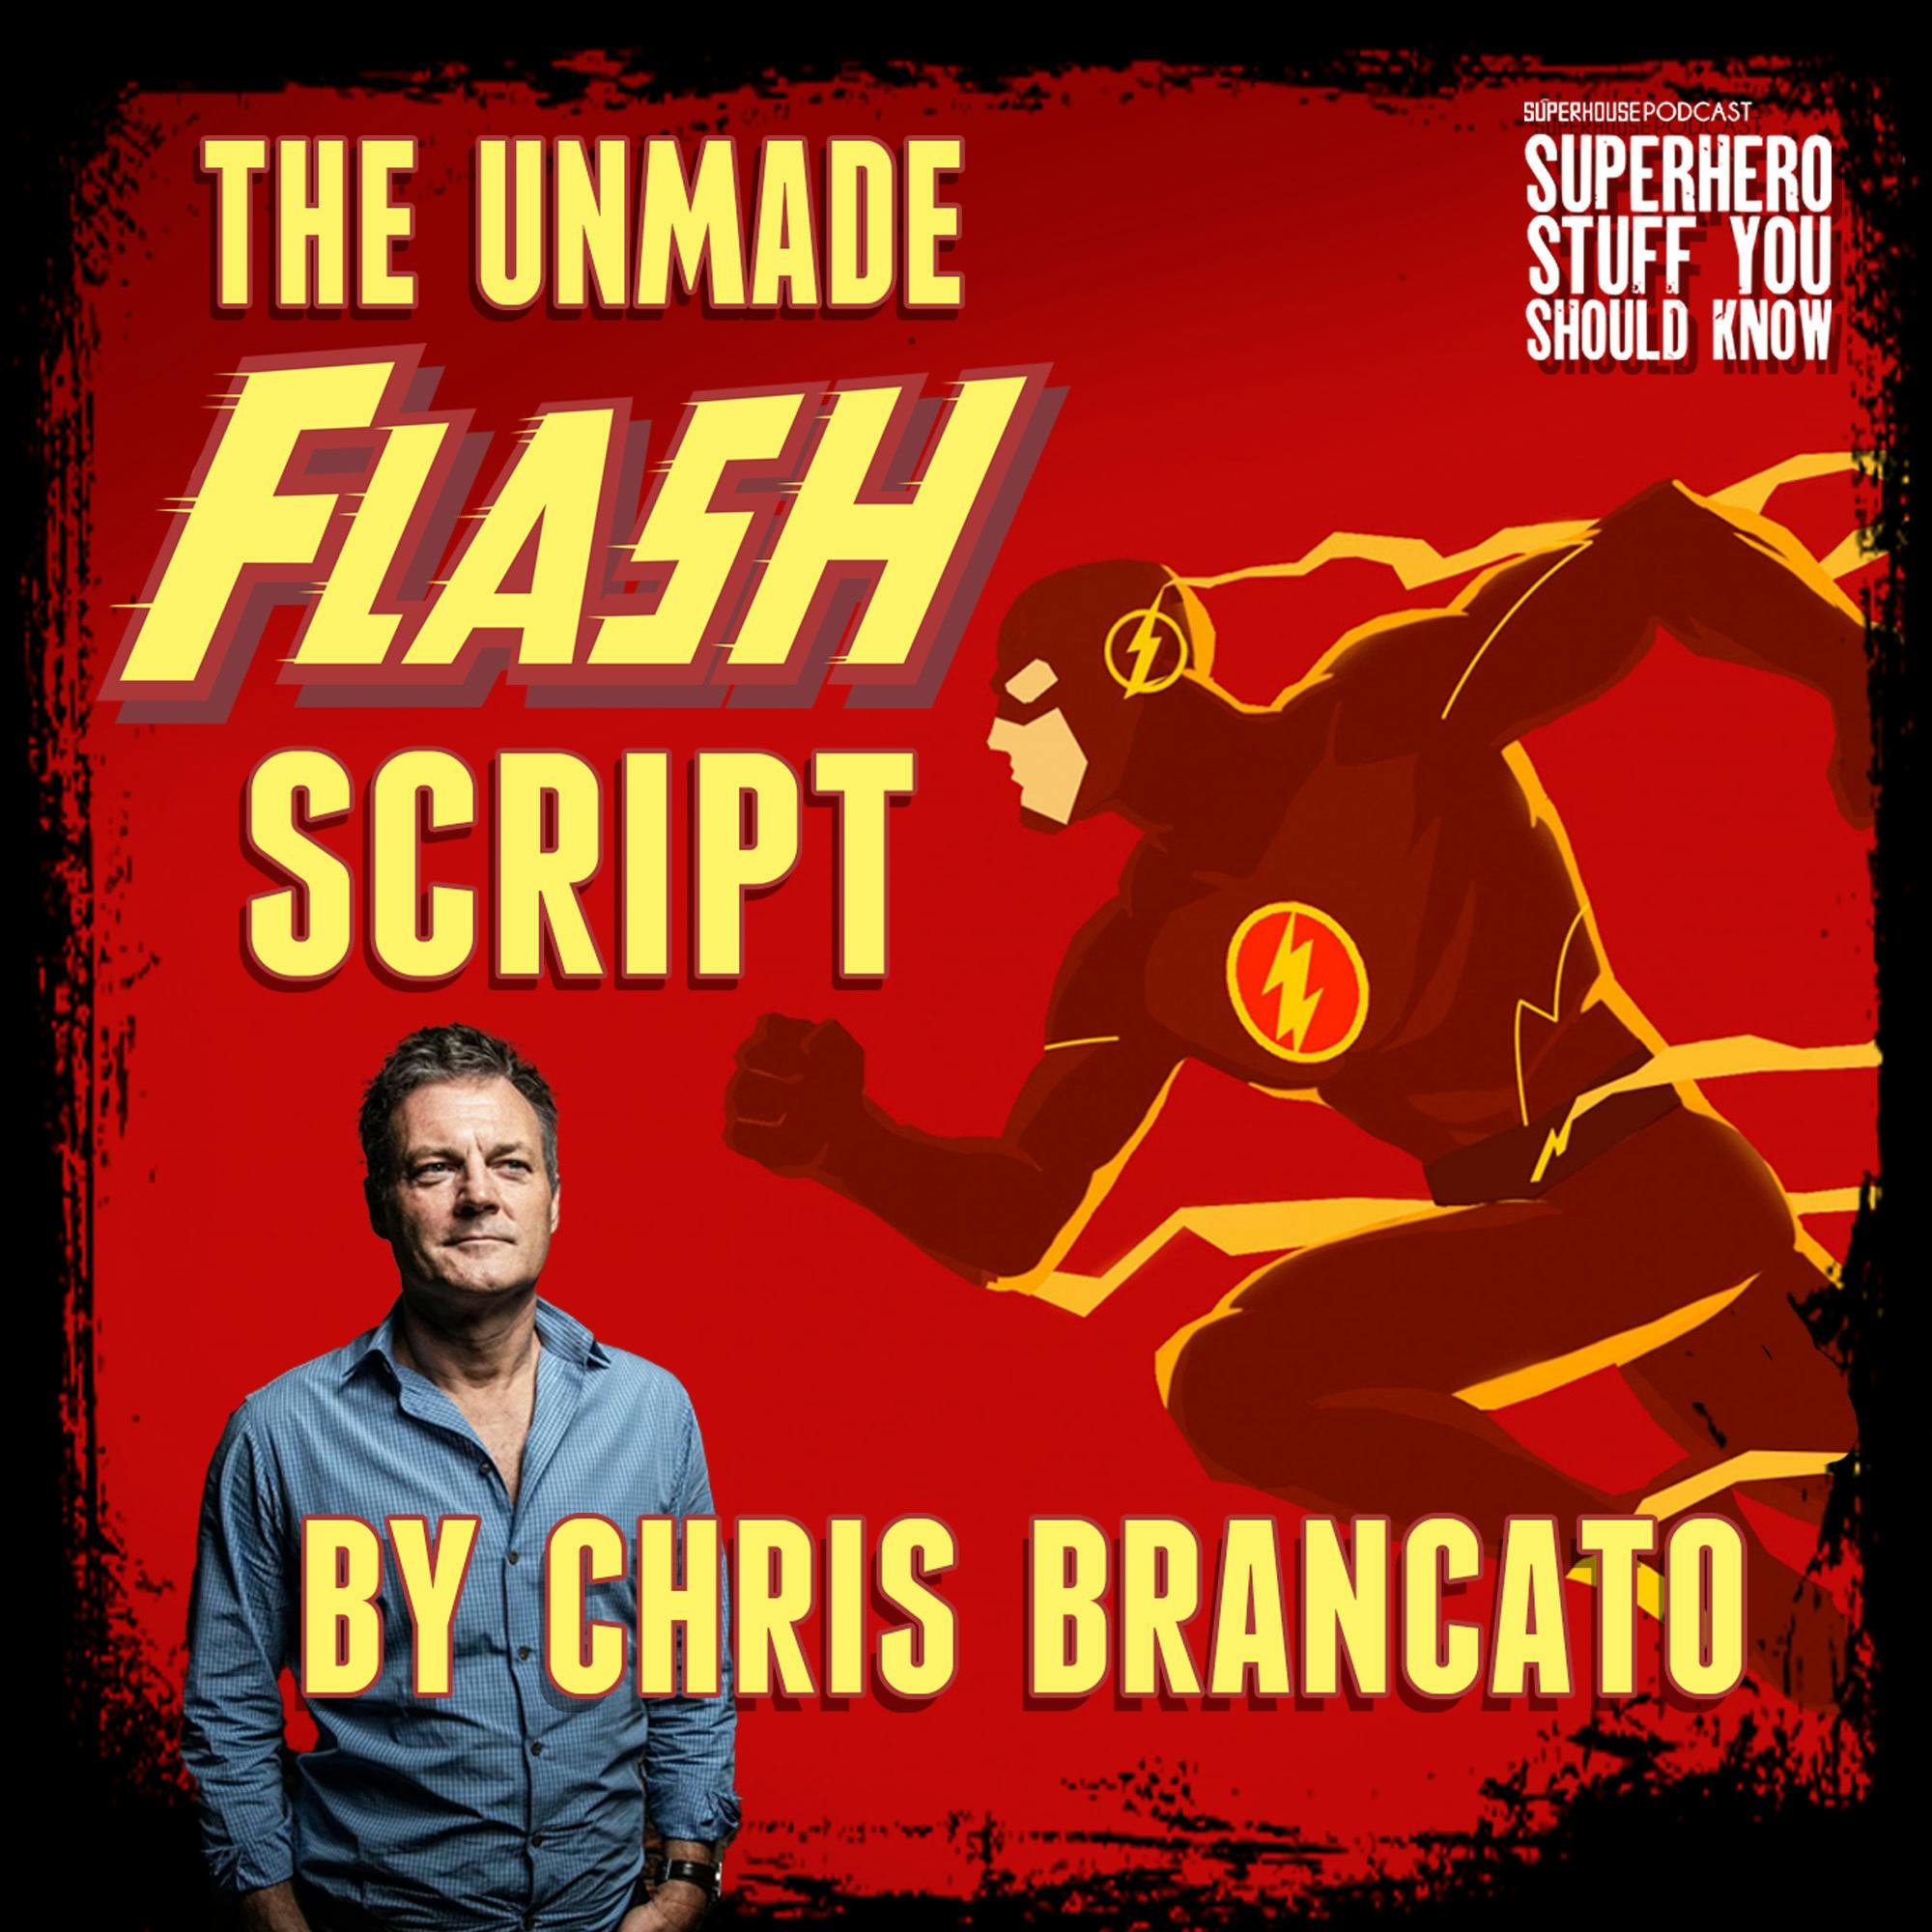 The Unmade THE FLASH Script by Chris Brancato